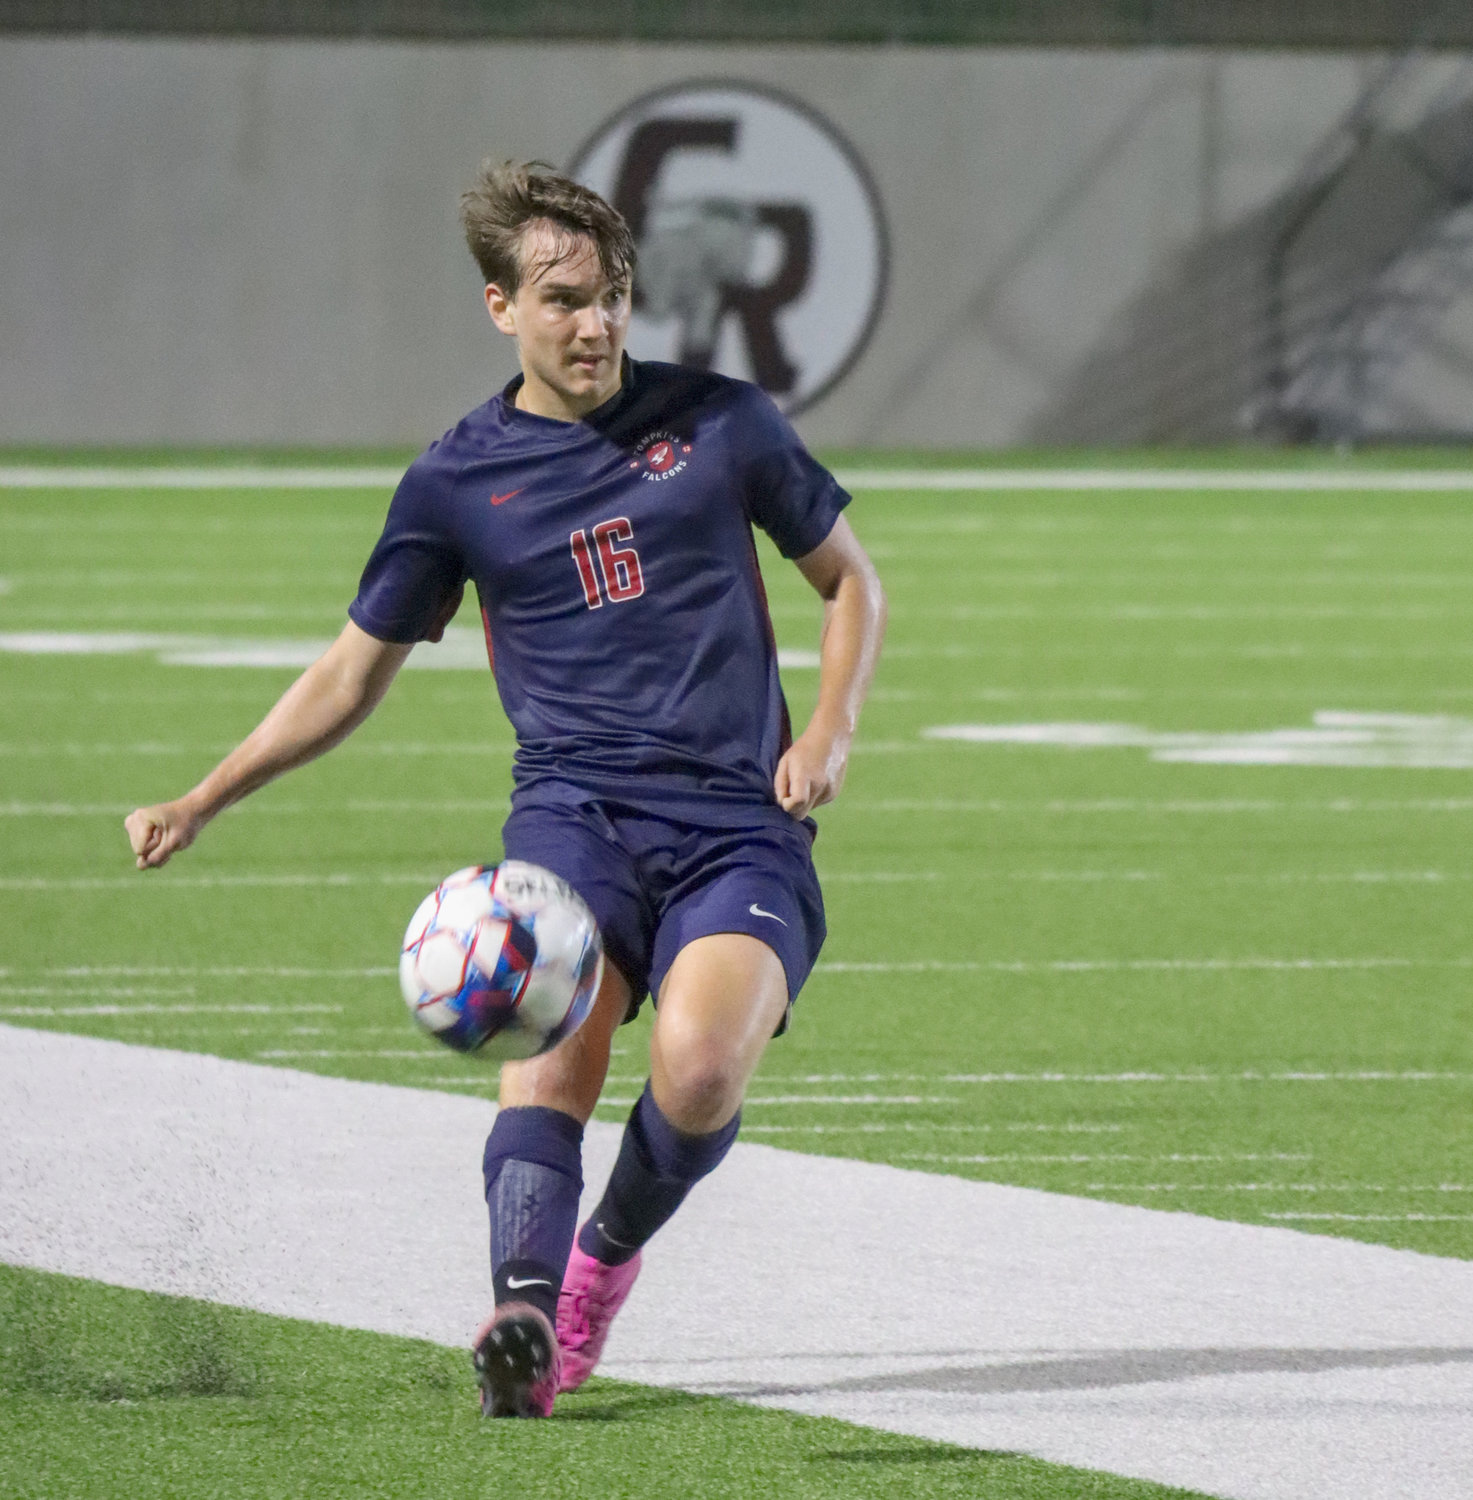 Tompkins senior Alec Shockley plays the ball downfield during Tompkins’ Class 6A Region III final against Jersey Village on Friday, April 9, at Legacy Stadium.